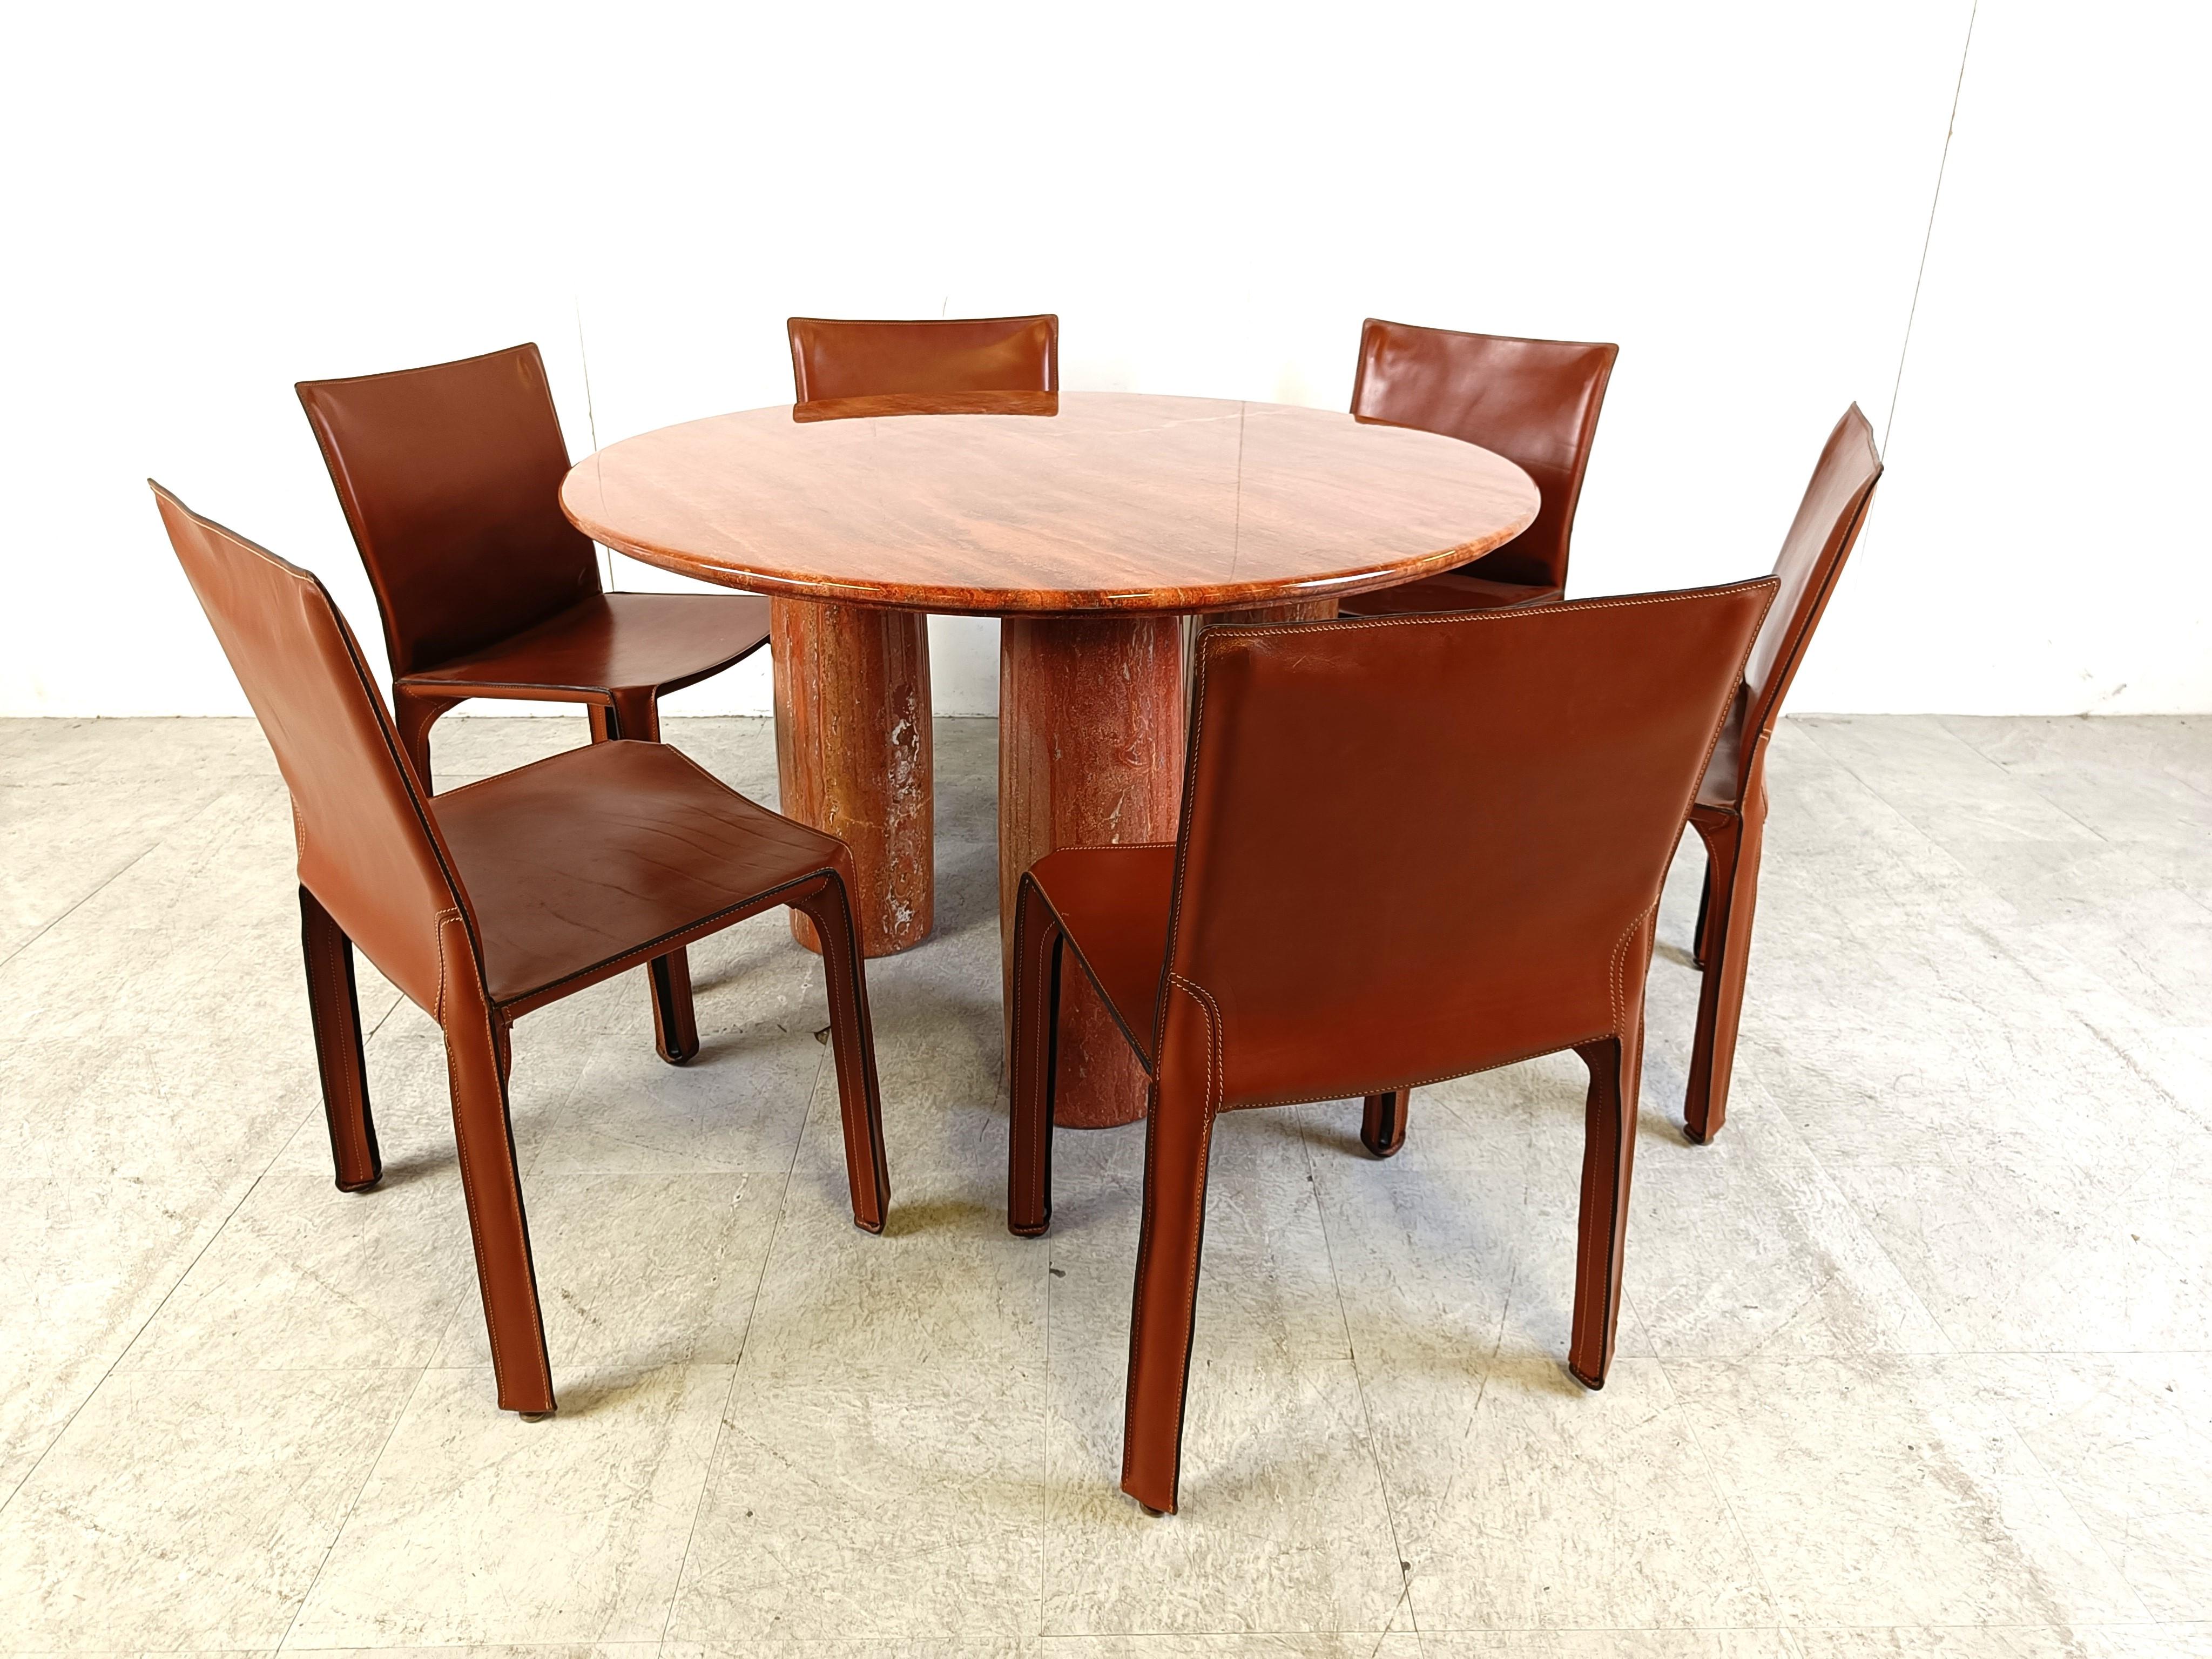 Mid-Century Modern Il Colonnato Dining Table in red travertine by Mario Bellini for Cassina, 1970s